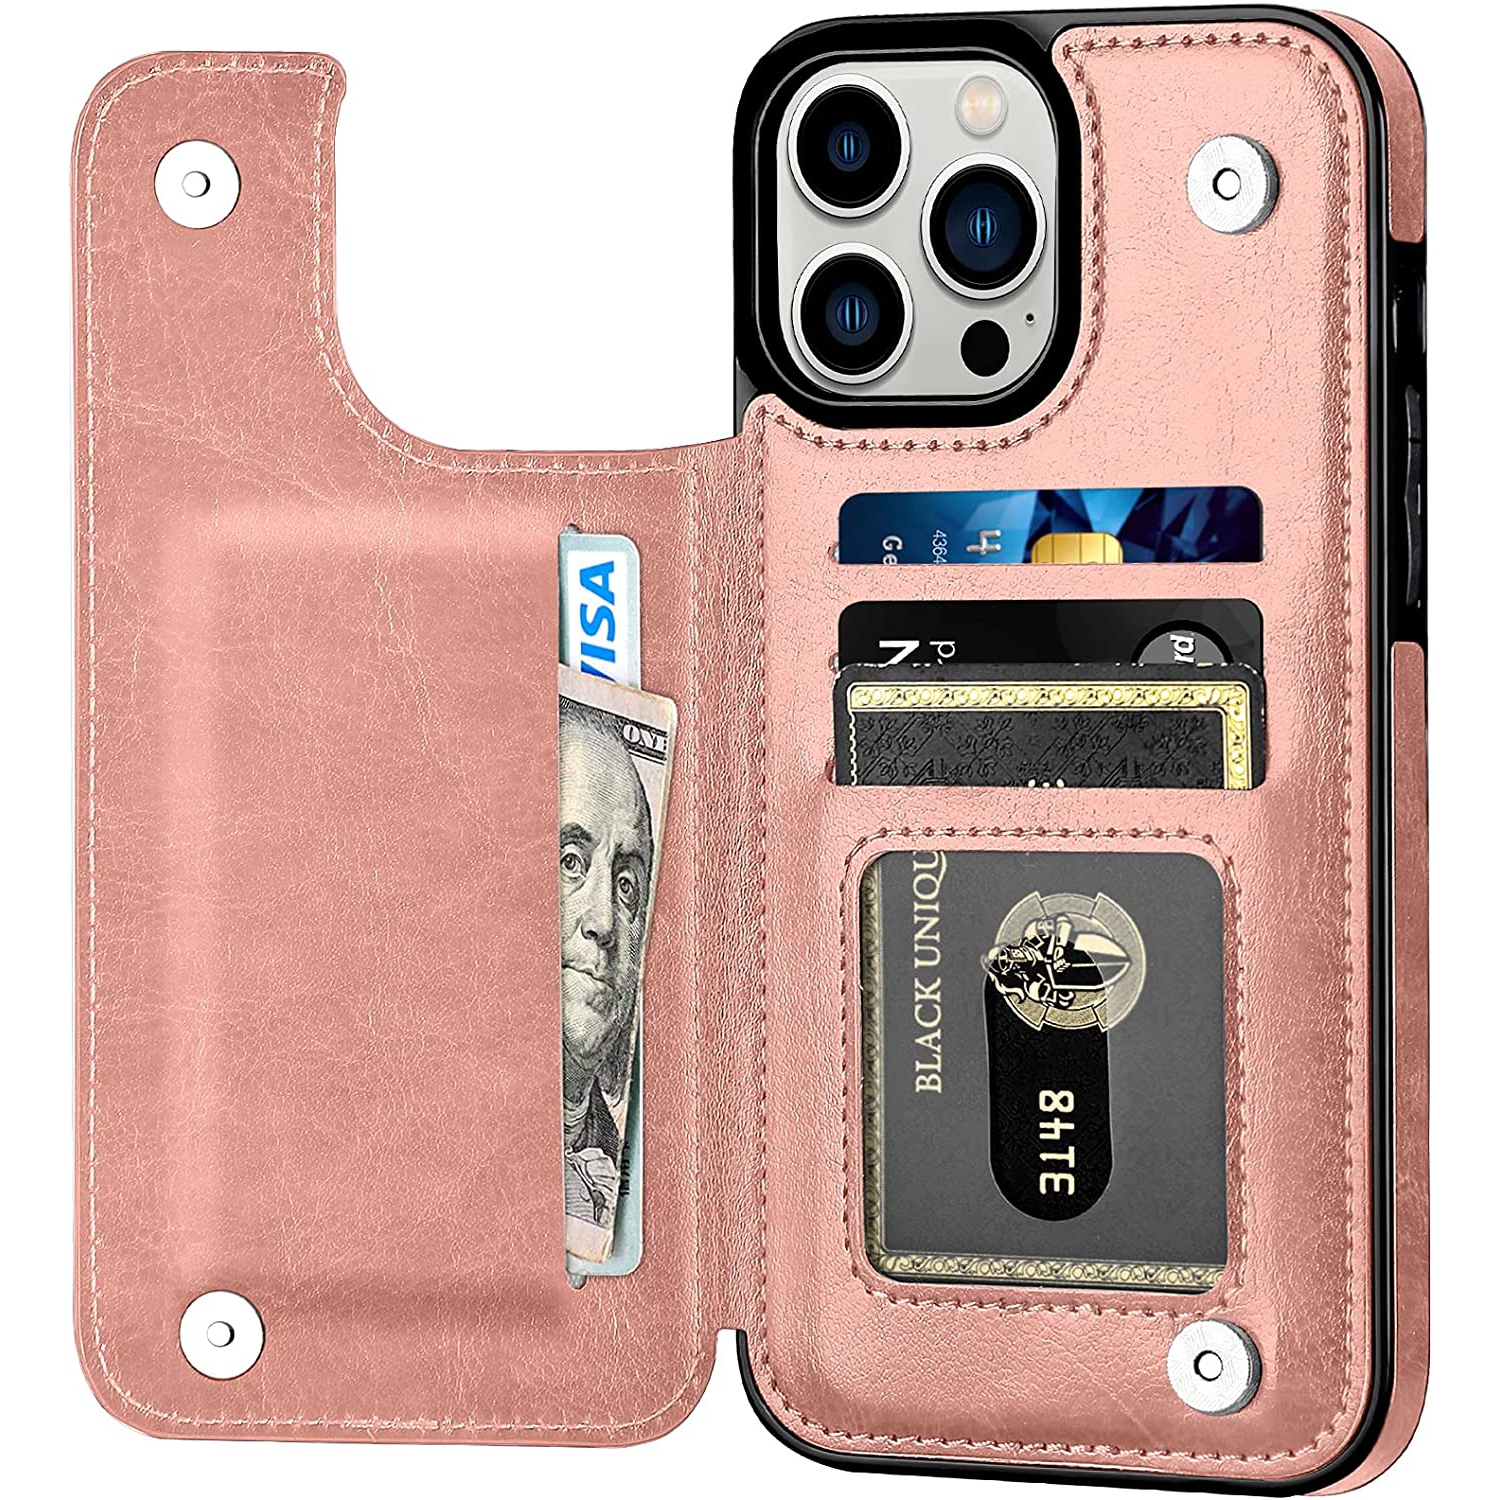 Designed for iPhone 13 Pro Max Case, Soft PU Leather Card Case with Kickstand Slim Protective Flip Cover